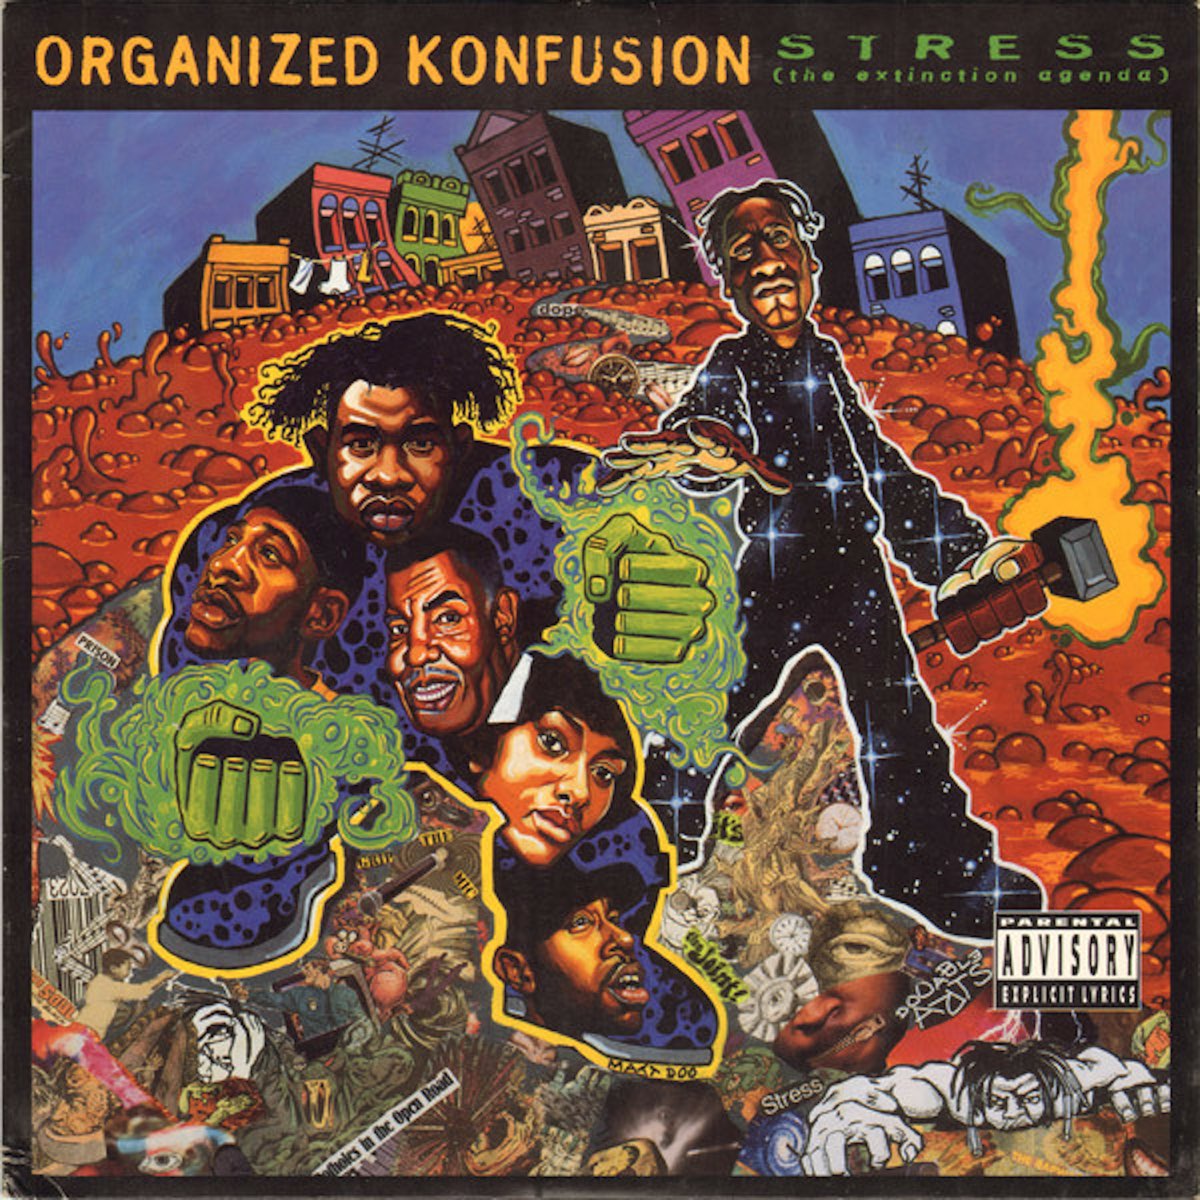 Organized Konfusion - 'Stress' [Official Ringtone for Android]